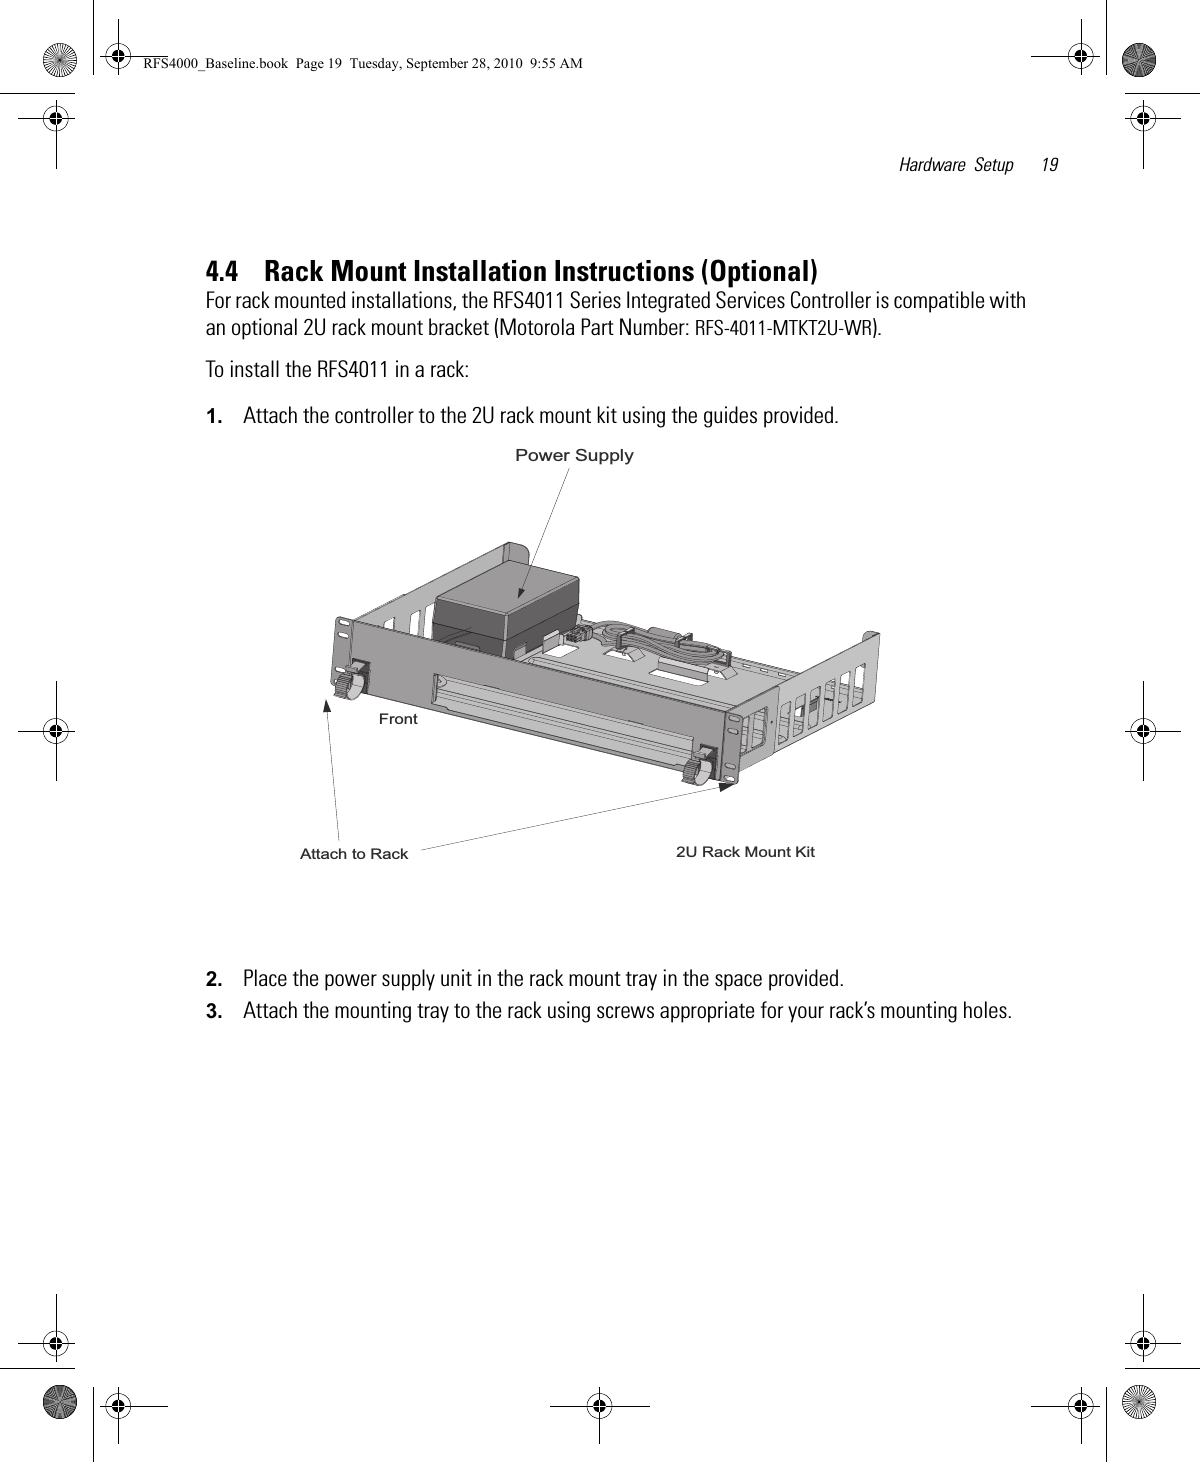 Hardware Setup 194.4    Rack Mount Installation Instructions (Optional)For rack mounted installations, the RFS4011 Series Integrated Services Controller is compatible with an optional 2U rack mount bracket (Motorola Part Number: RFS-4011-MTKT2U-WR).To install the RFS4011 in a rack:1. Attach the controller to the 2U rack mount kit using the guides provided.2. Place the power supply unit in the rack mount tray in the space provided.3. Attach the mounting tray to the rack using screws appropriate for your rack’s mounting holes.2U Rack Mount KitFrontAttach to RackPower Supply RFS4000_Baseline.book  Page 19  Tuesday, September 28, 2010  9:55 AM